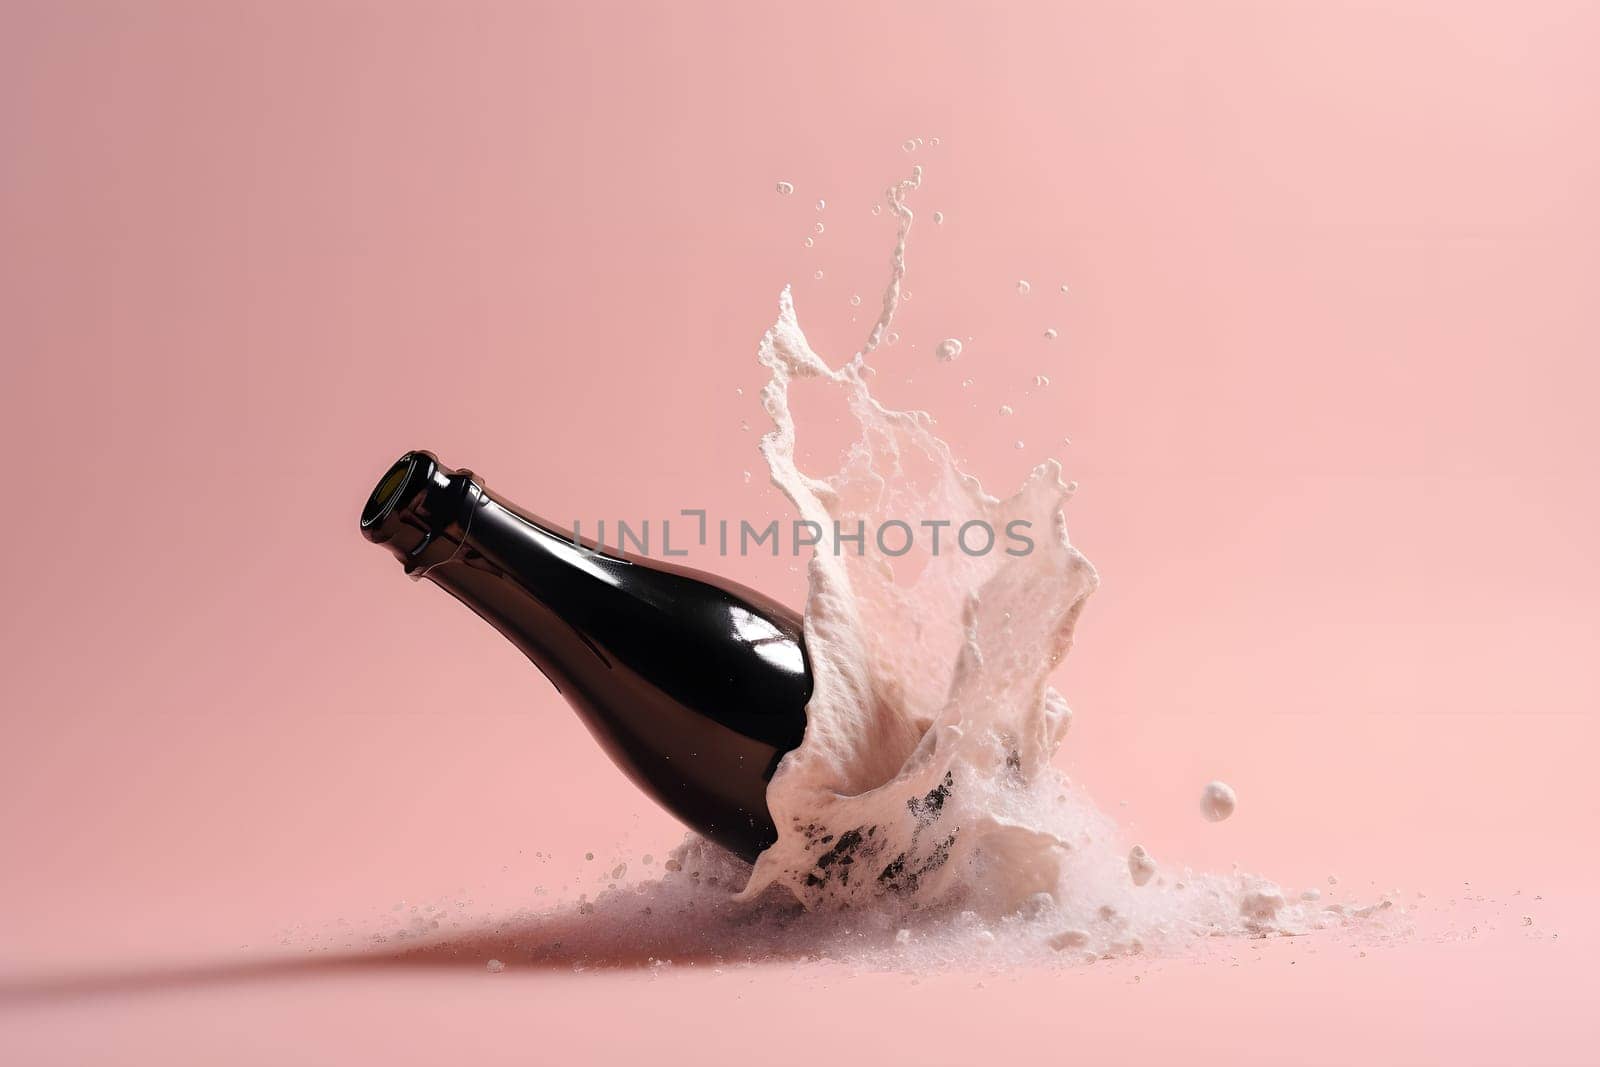 opened bottle of champagne with splashes on pink background. Neural network generated in May 2023. Not based on any actual scene or pattern.